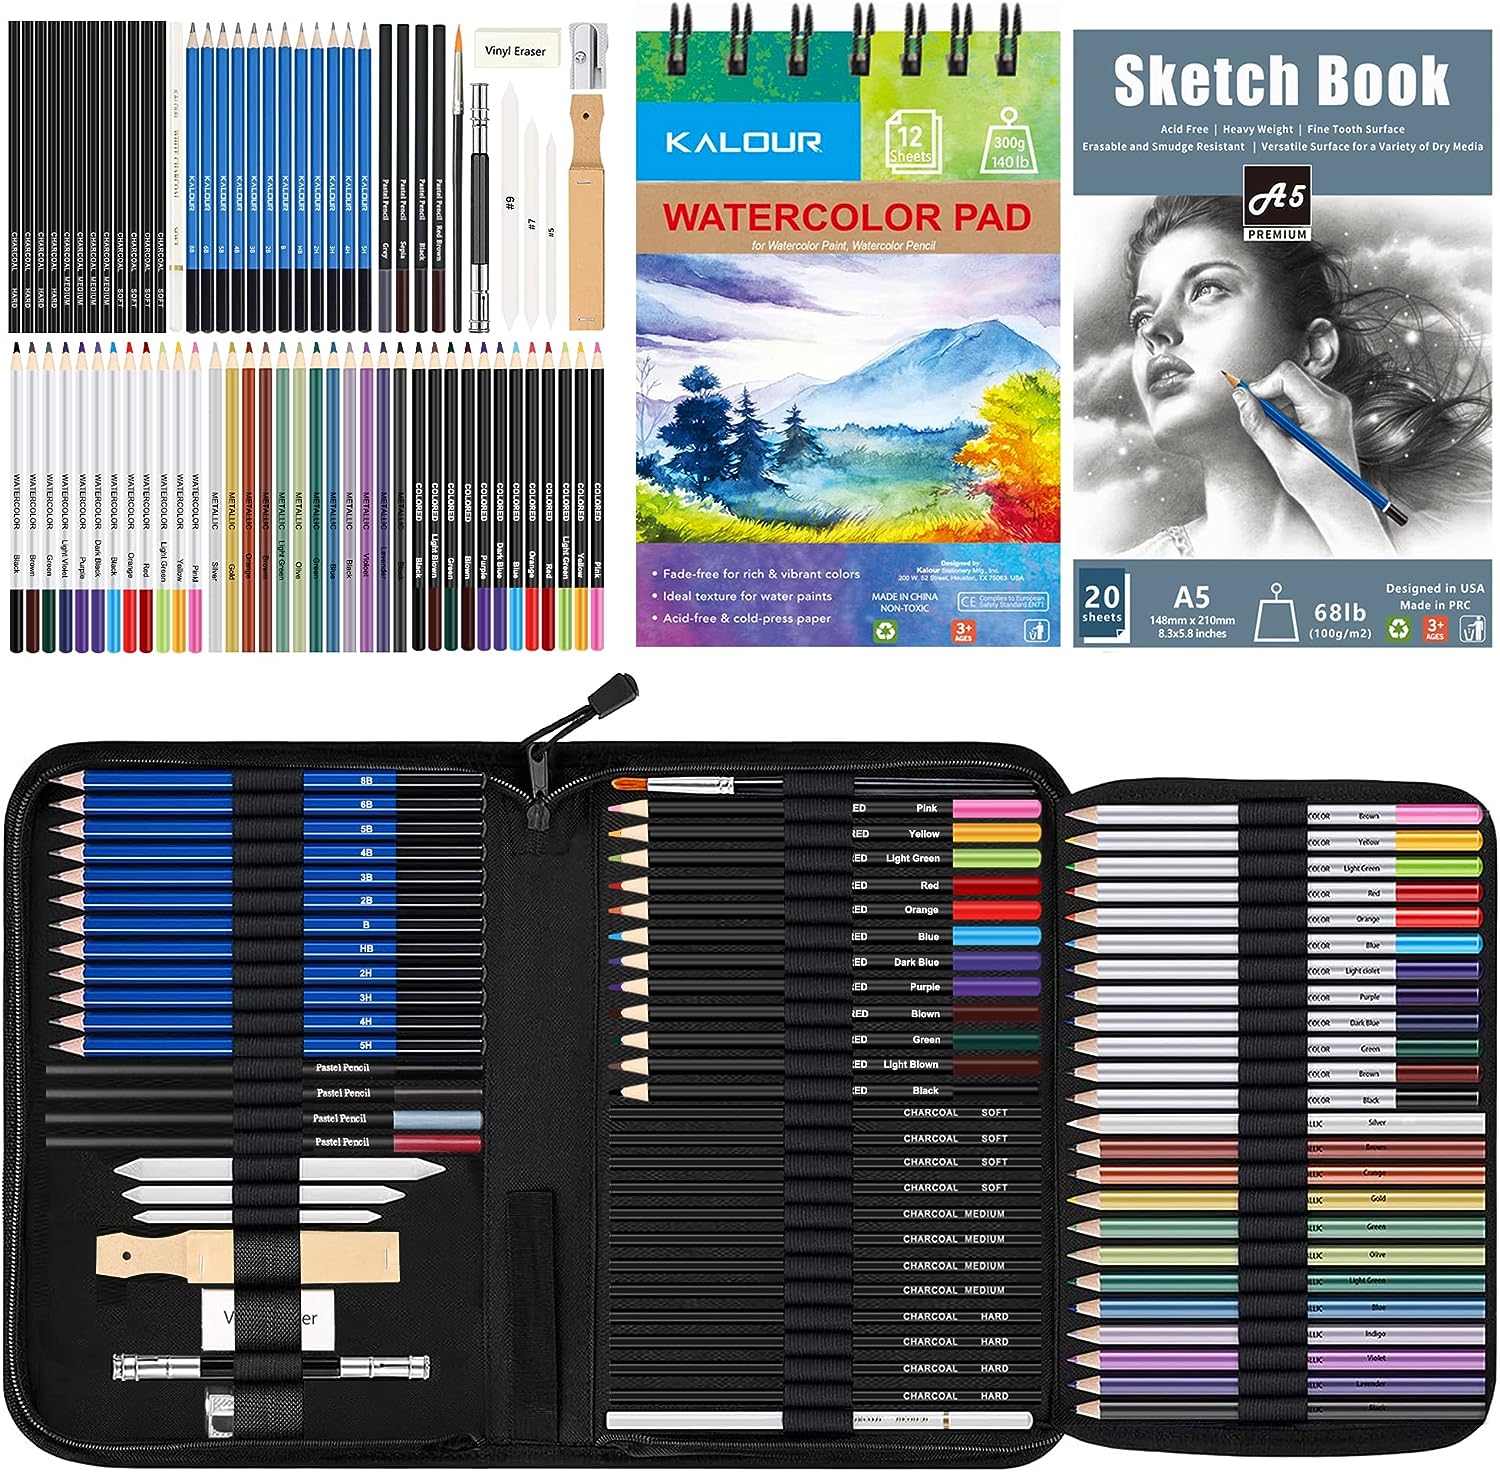 KALOUR 52-Pack Sketch Drawing Pencils Kit with Two Sketchbook,Tin Box,Include Graphite,Charcoal and Artists Tools,Pro Art Drawing Supplies for